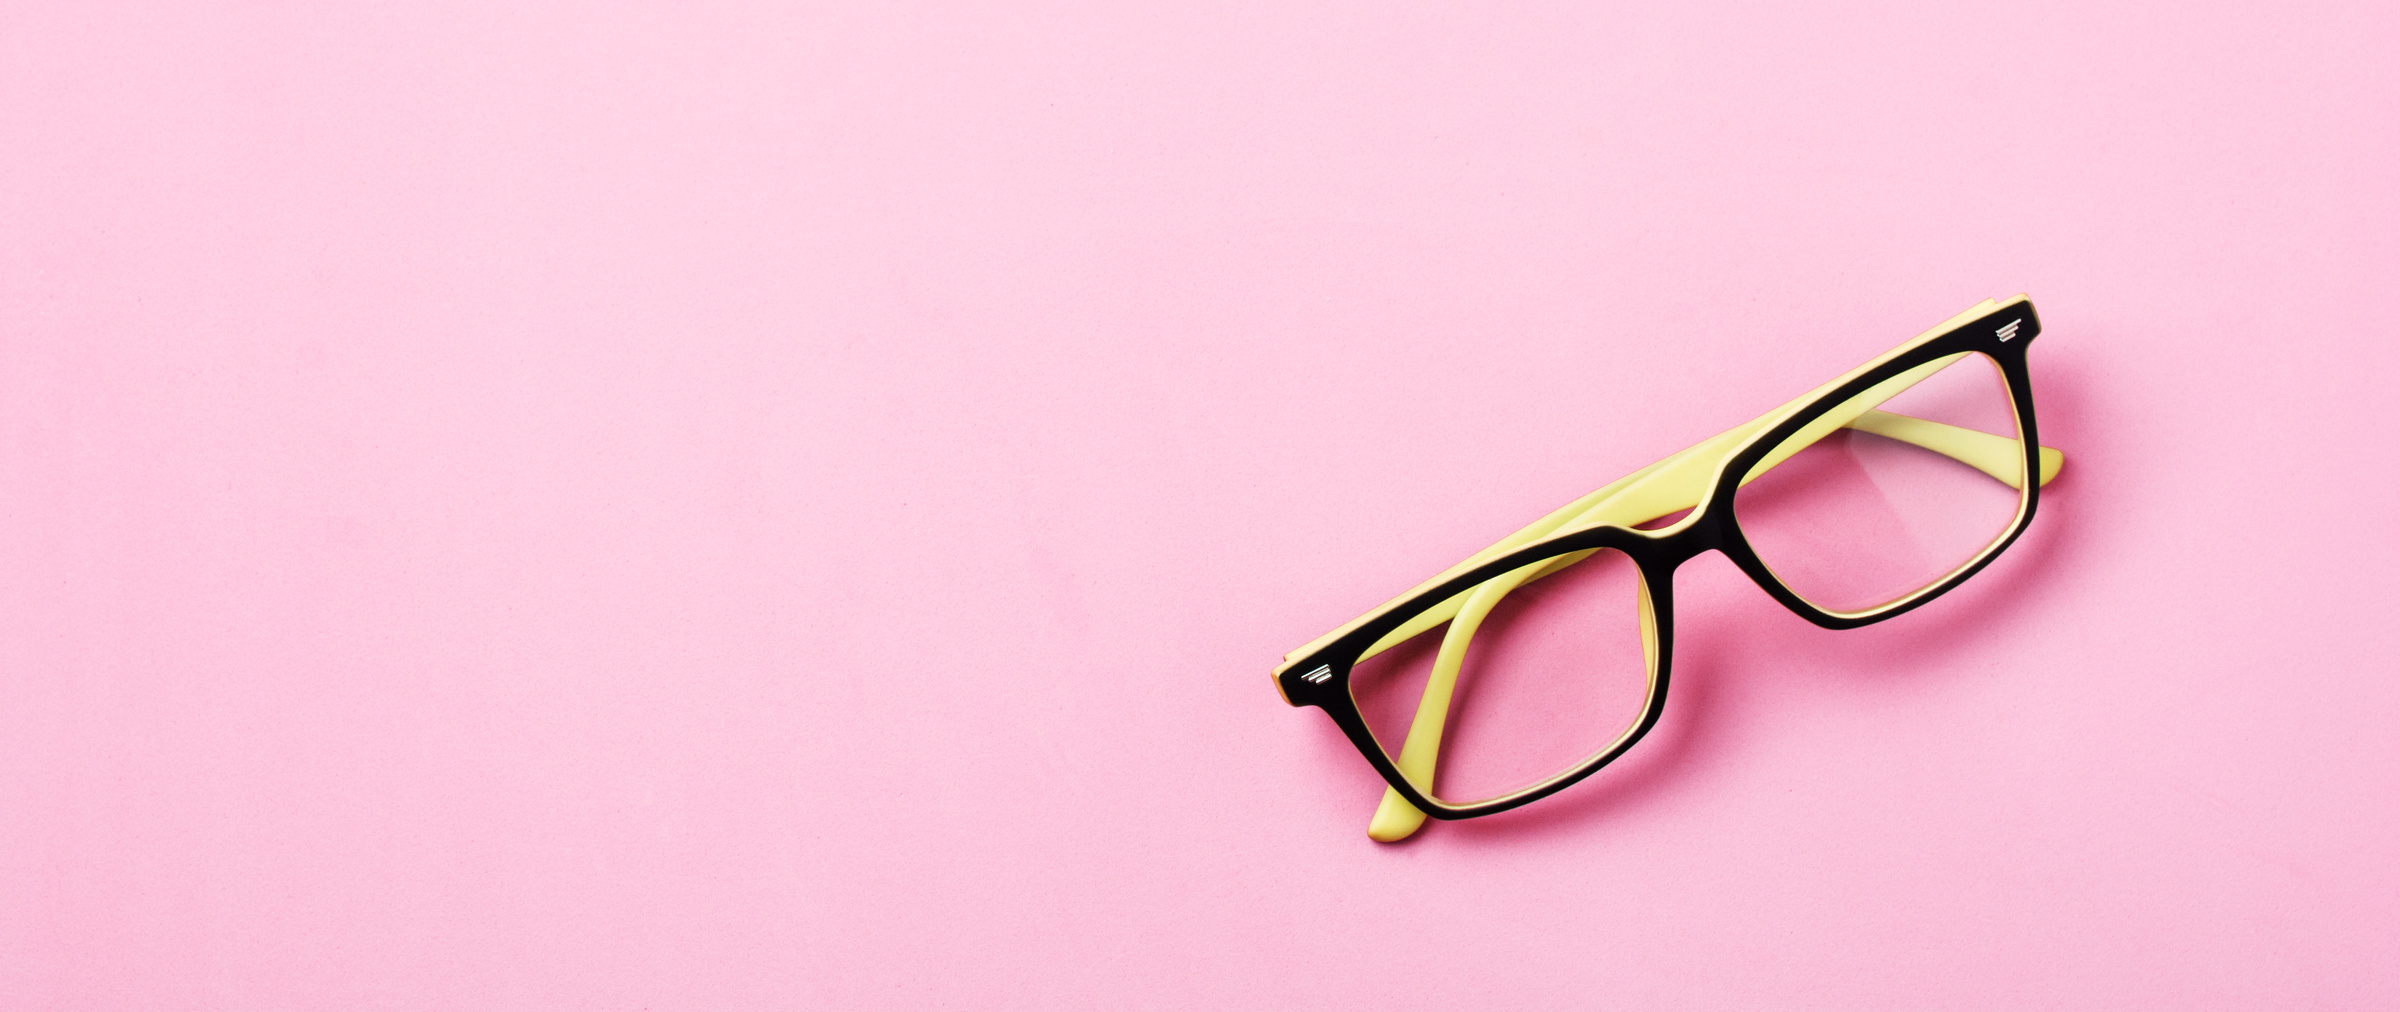 Modern Spectacles Eye Glass or Eyeglasses Isolated on Pink Background. Top View. Banner. Mock up.